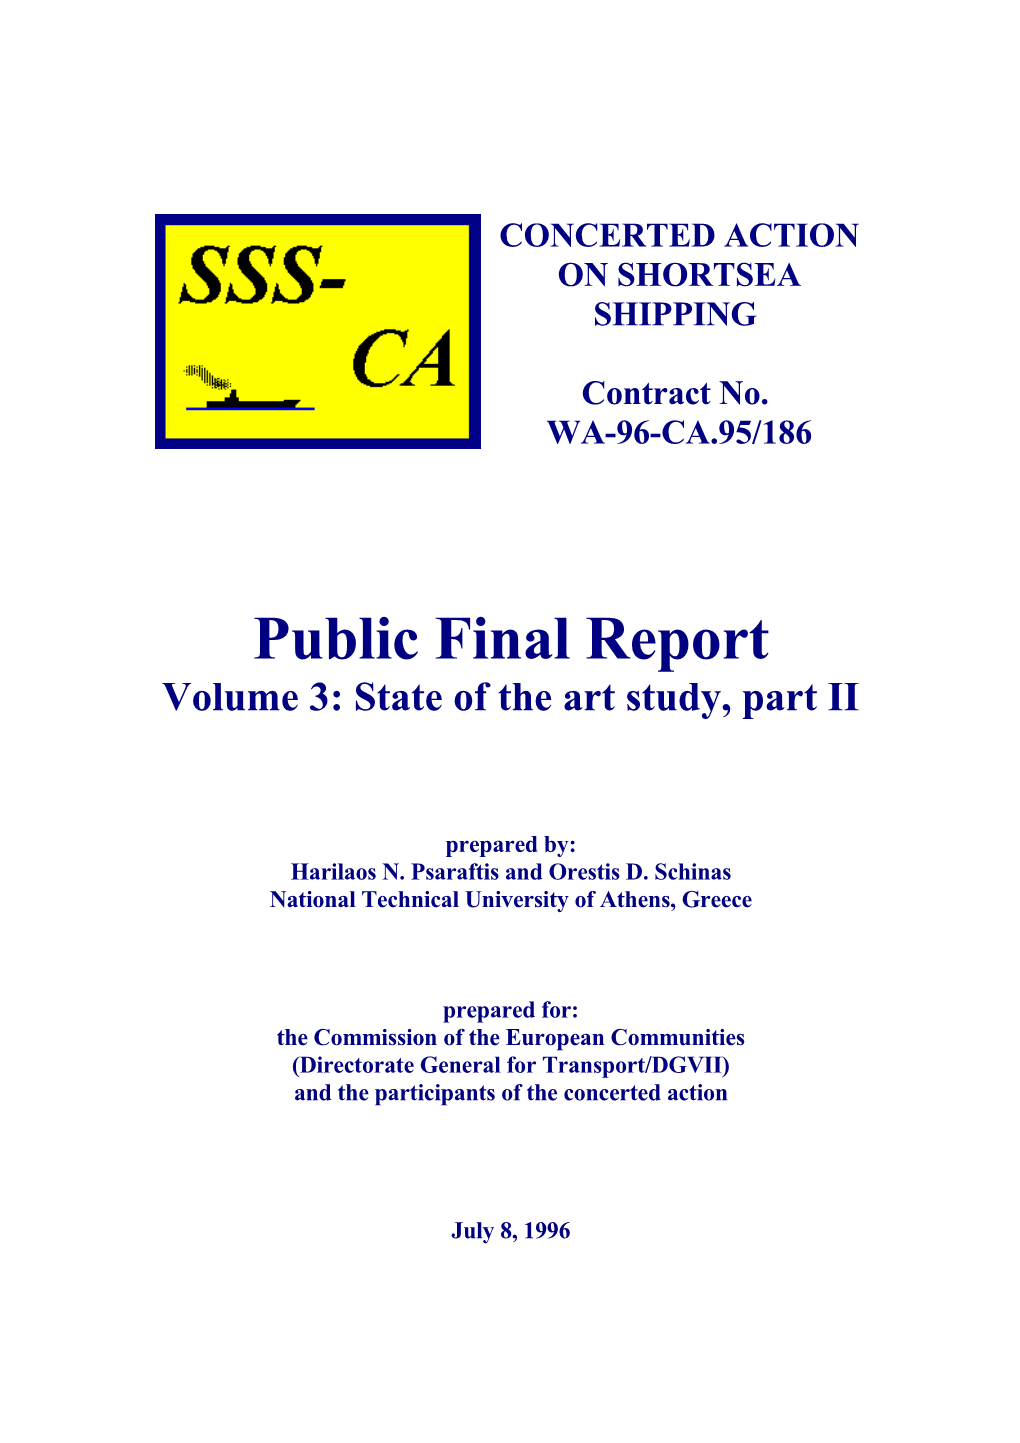 Volume 3: State of the Art Study, Part II